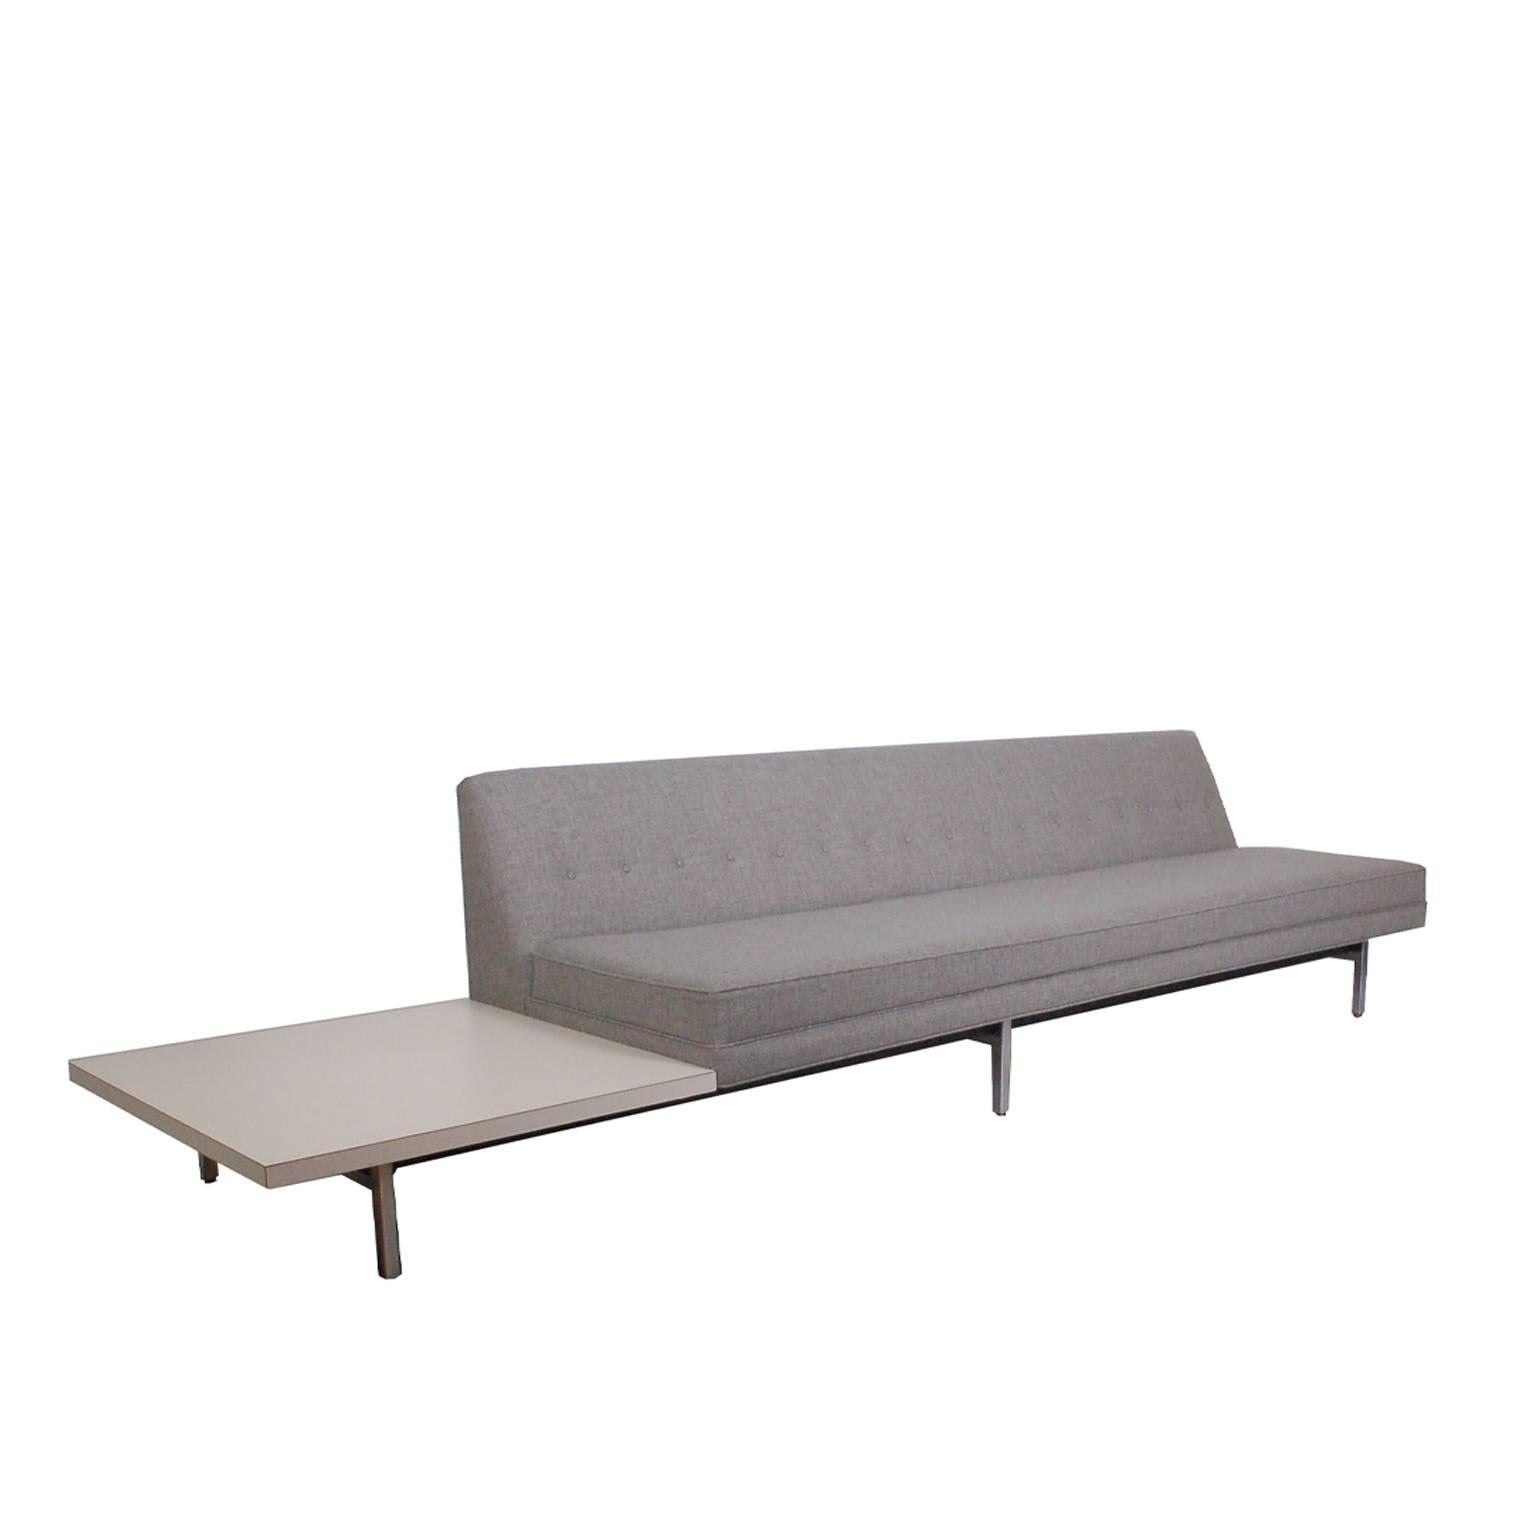 Three-seat sofa with laminate side table attached. Six square brushed steel legs. Previously upholstered. With round metal tag.
Made by Herman Miller.

 